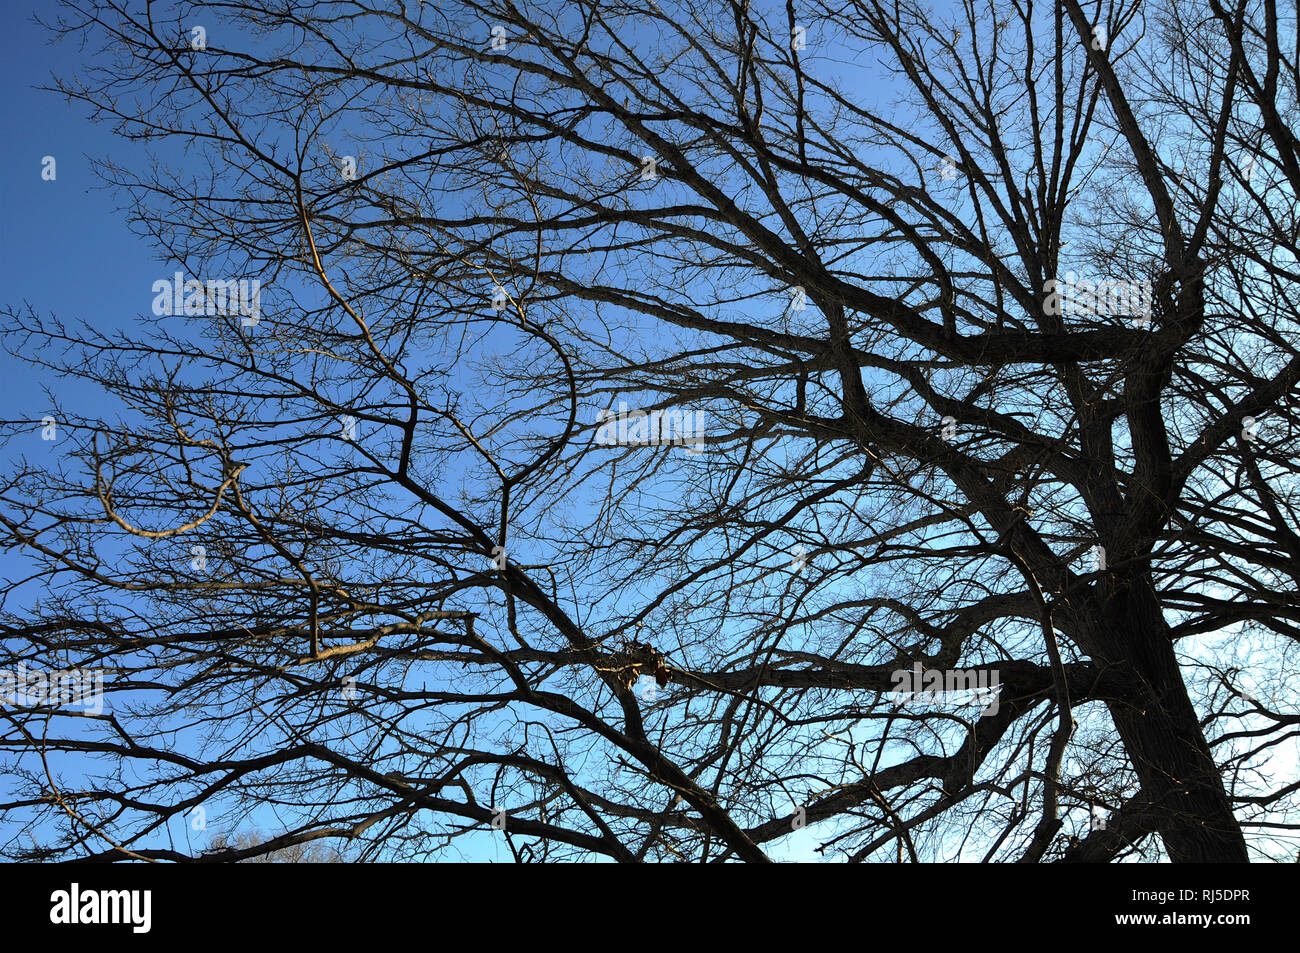 A tangle of branches from winter trees hibernating in winter set against the sky. Stock Photo